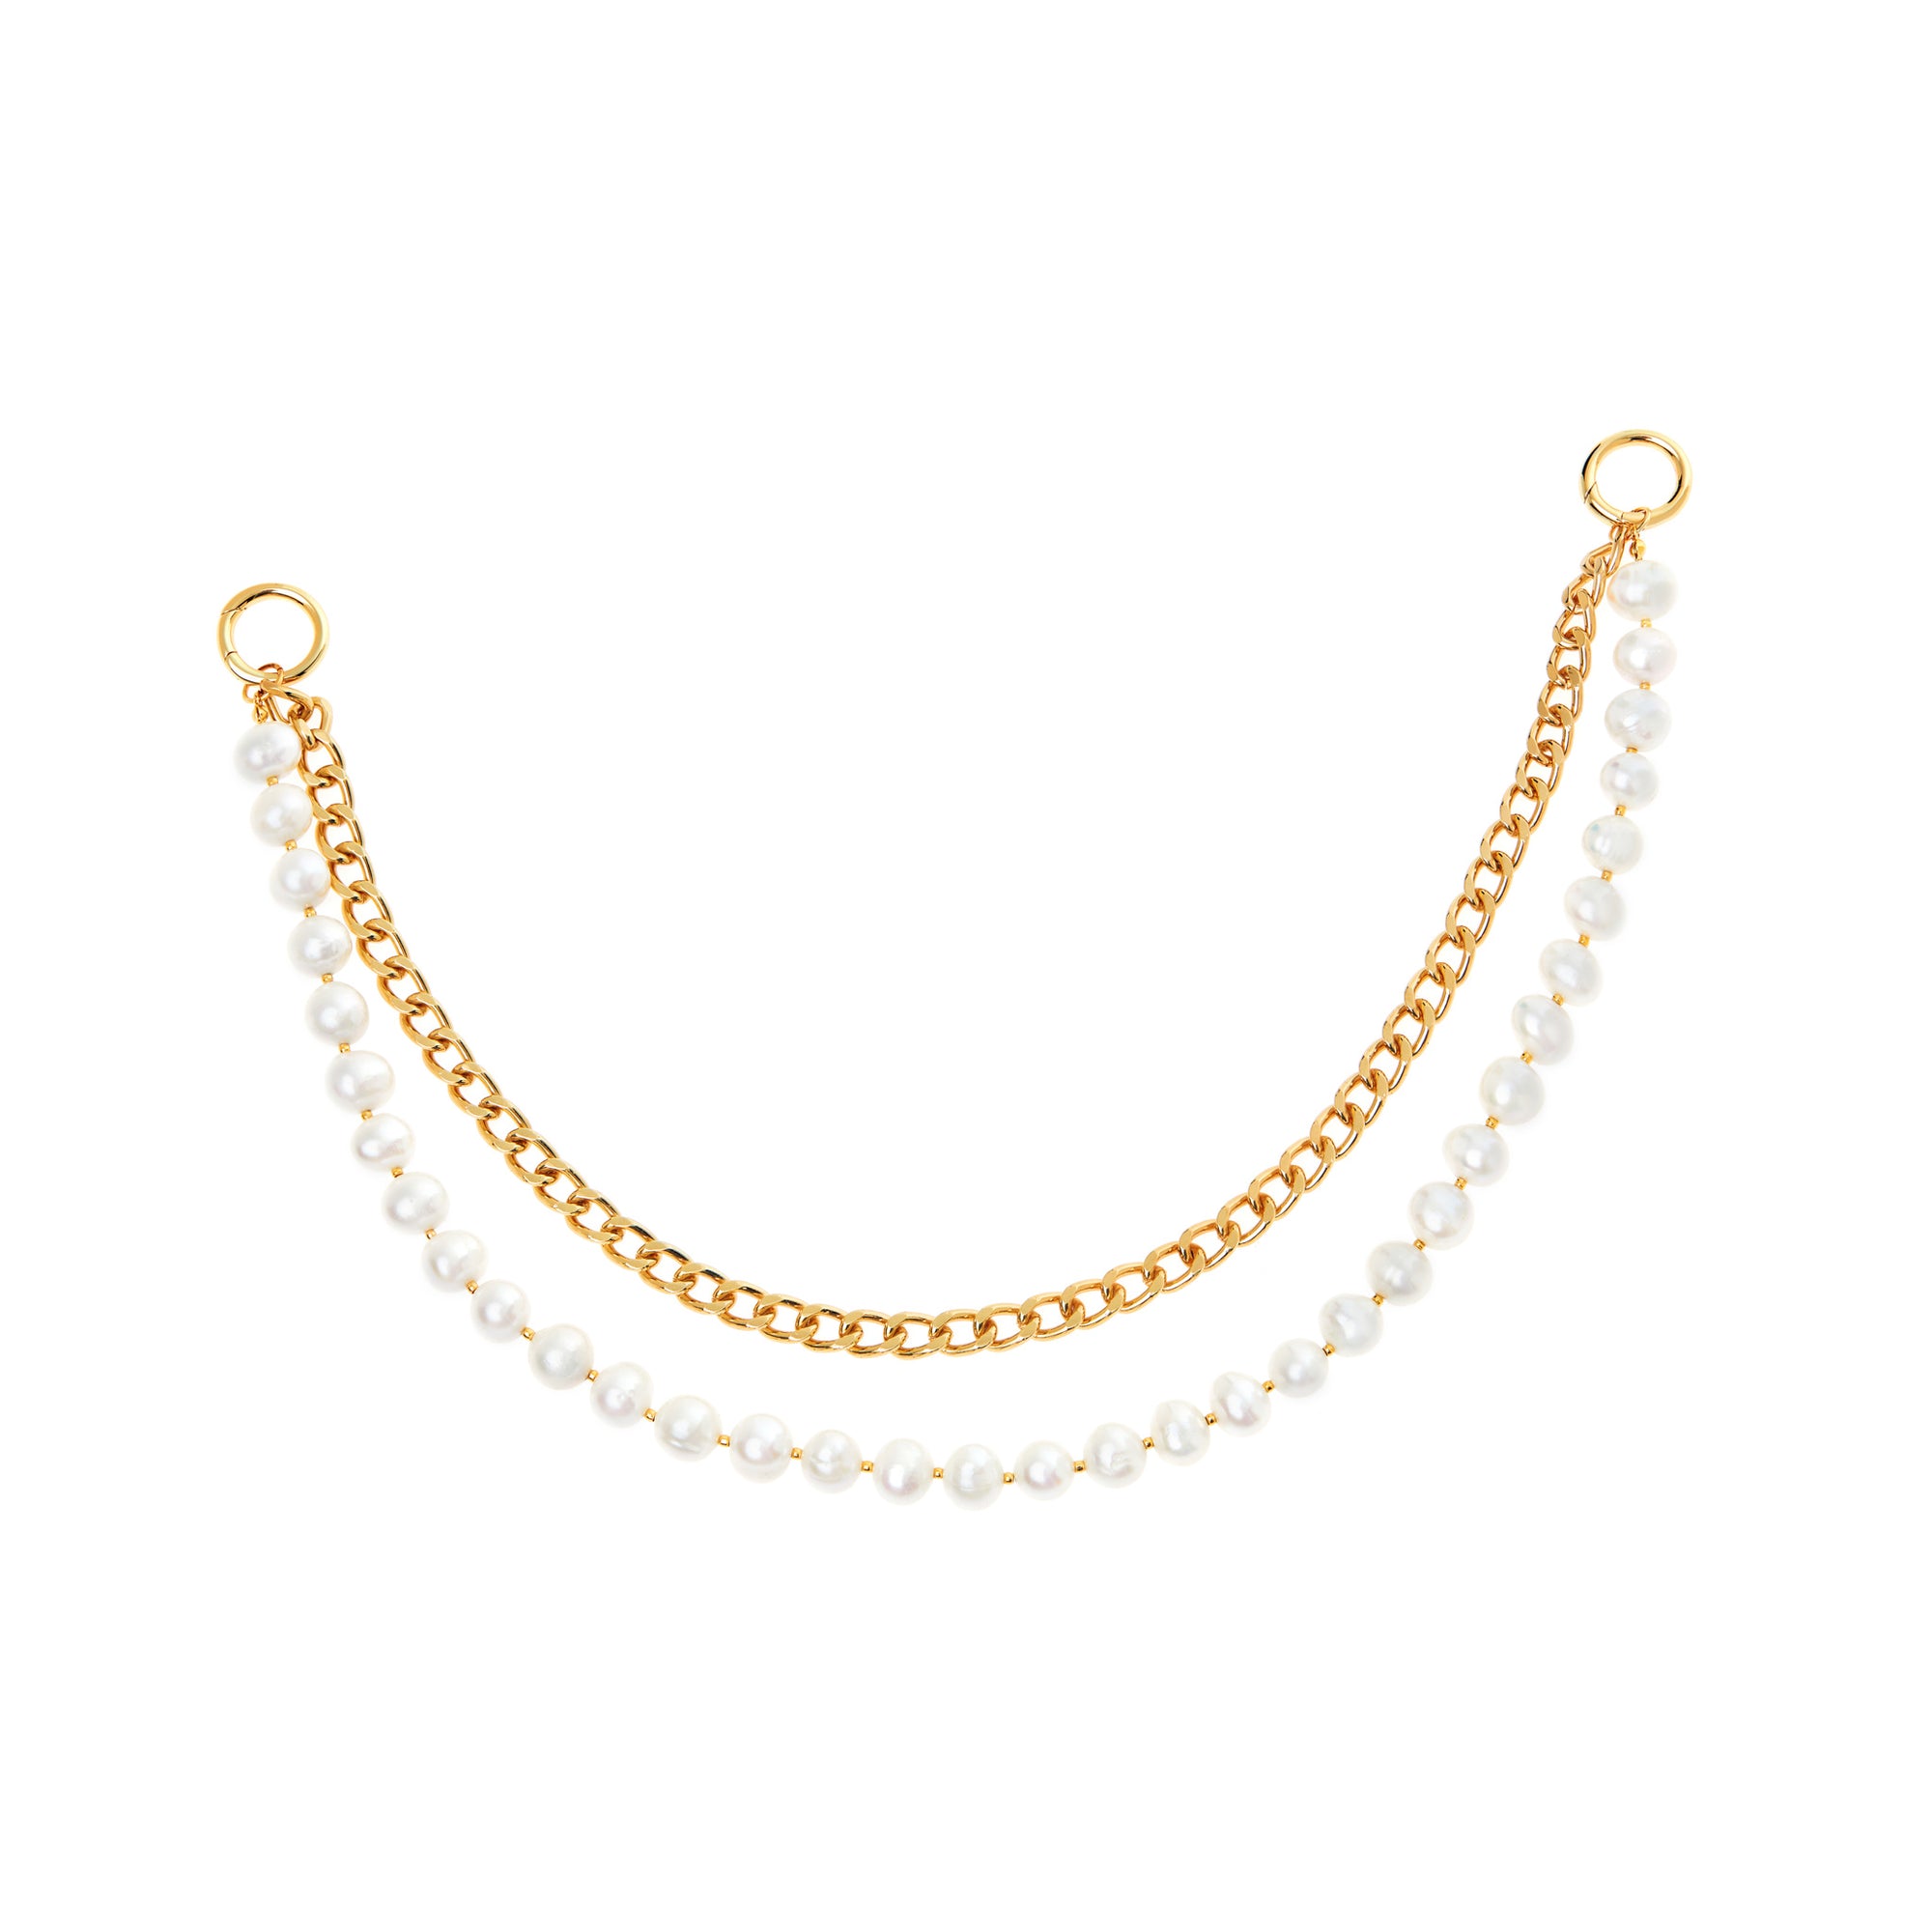 Body Chain 'Be Gentle' – Gold